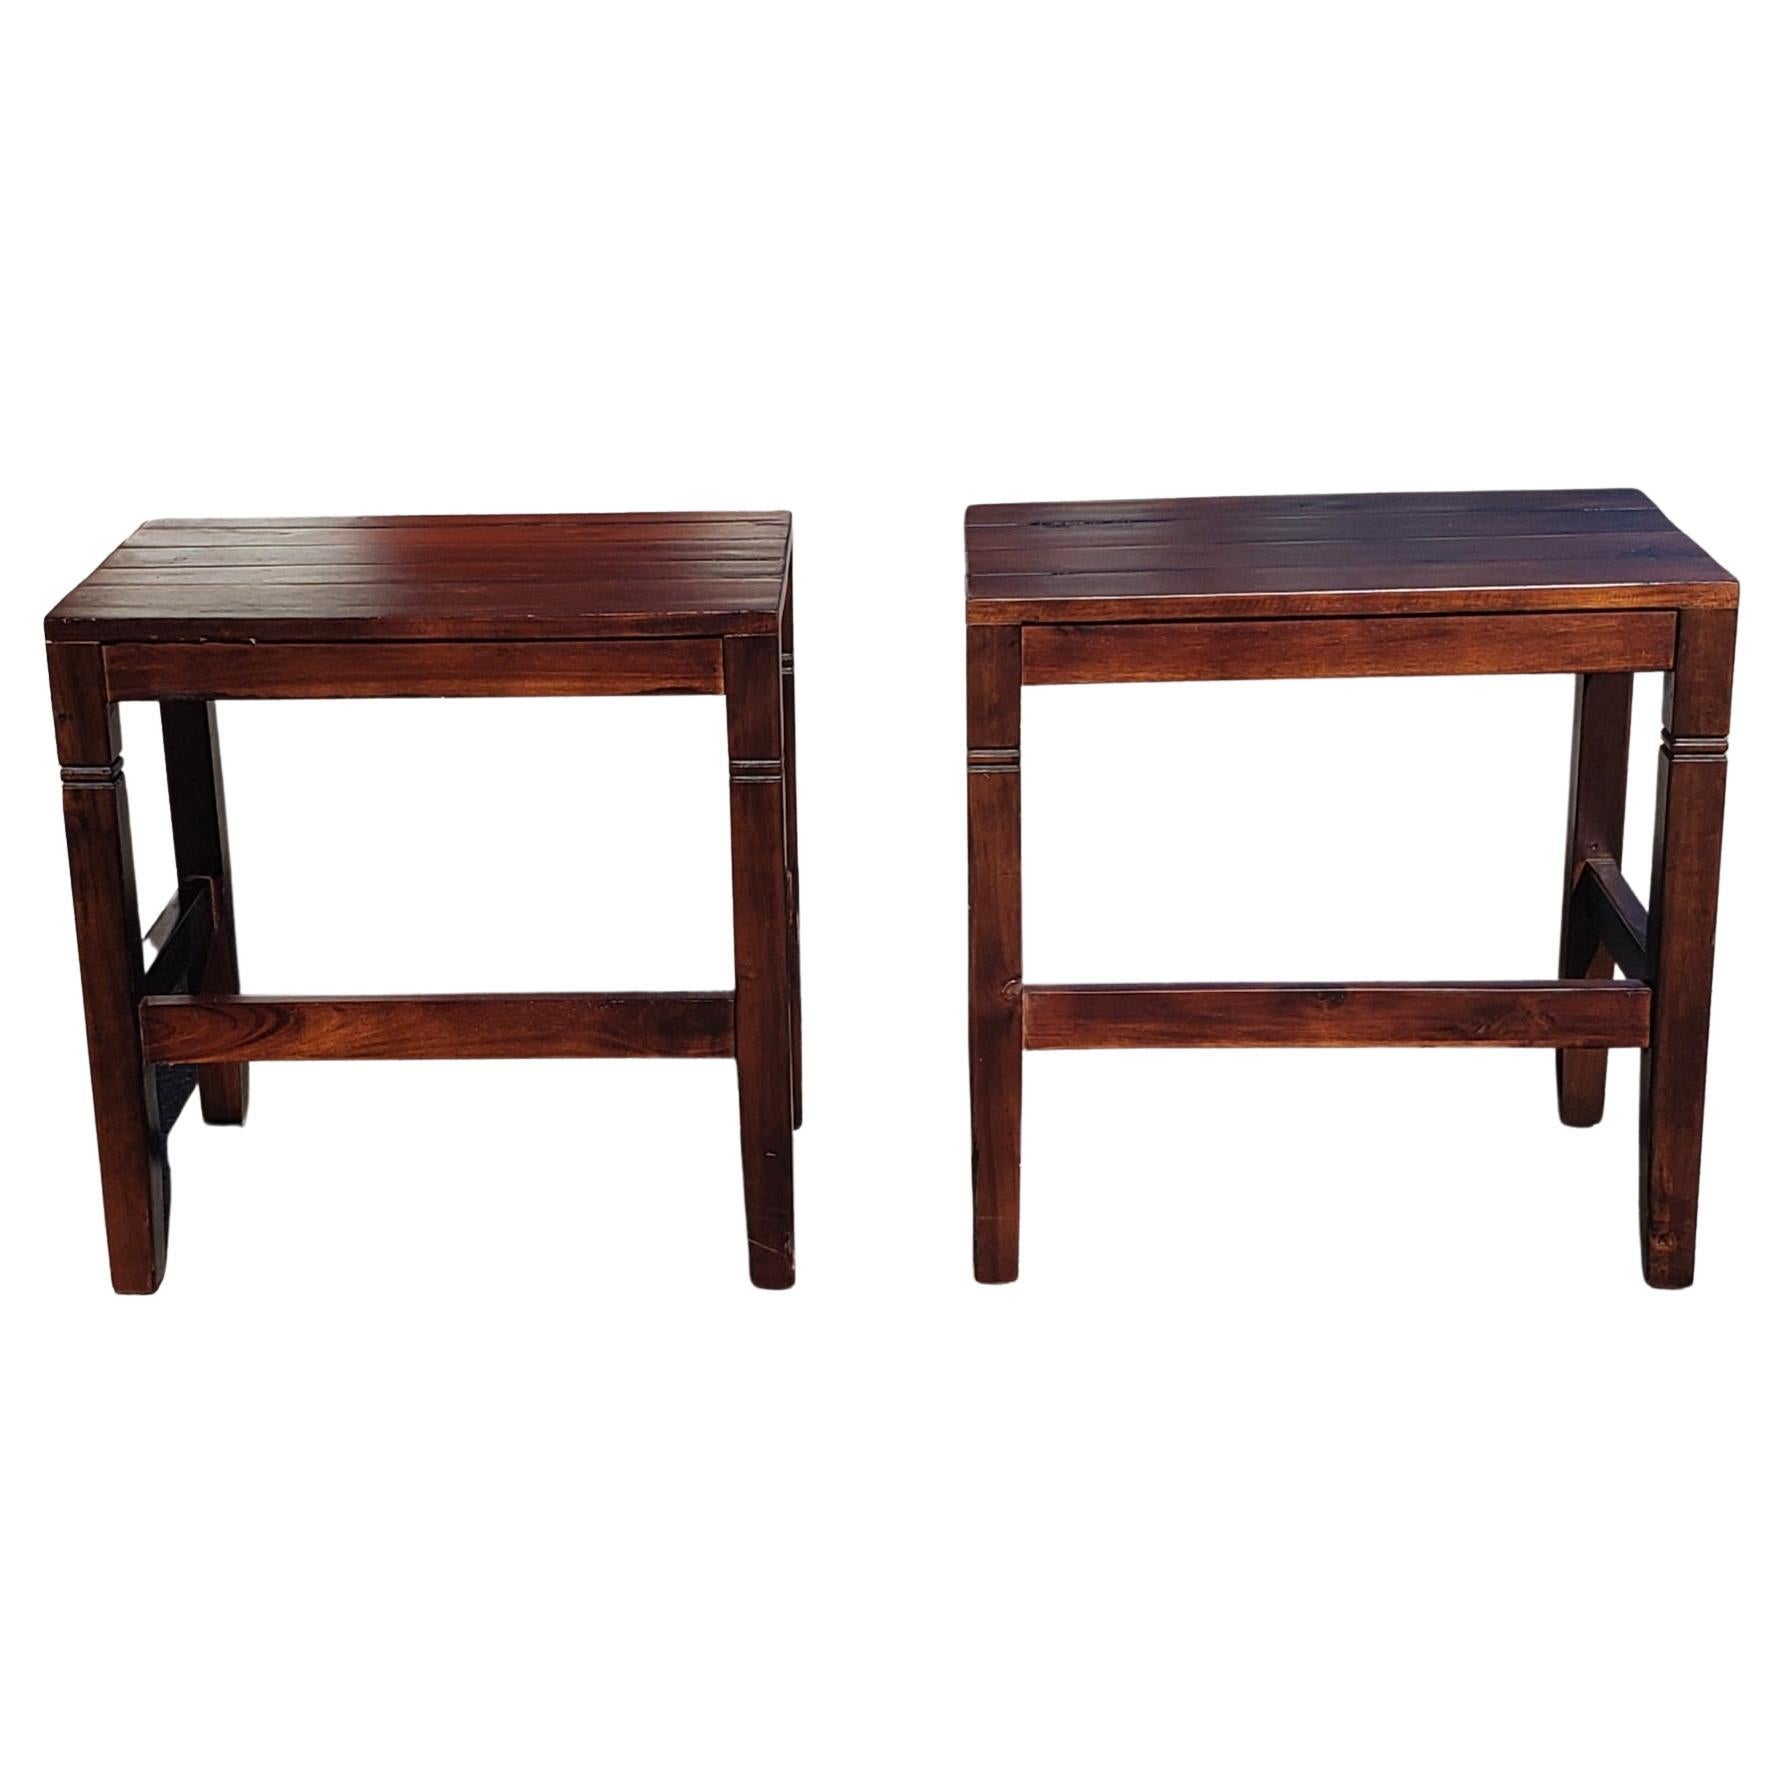 A pair solid walnut rectangular side tables. 
Measure 17.75